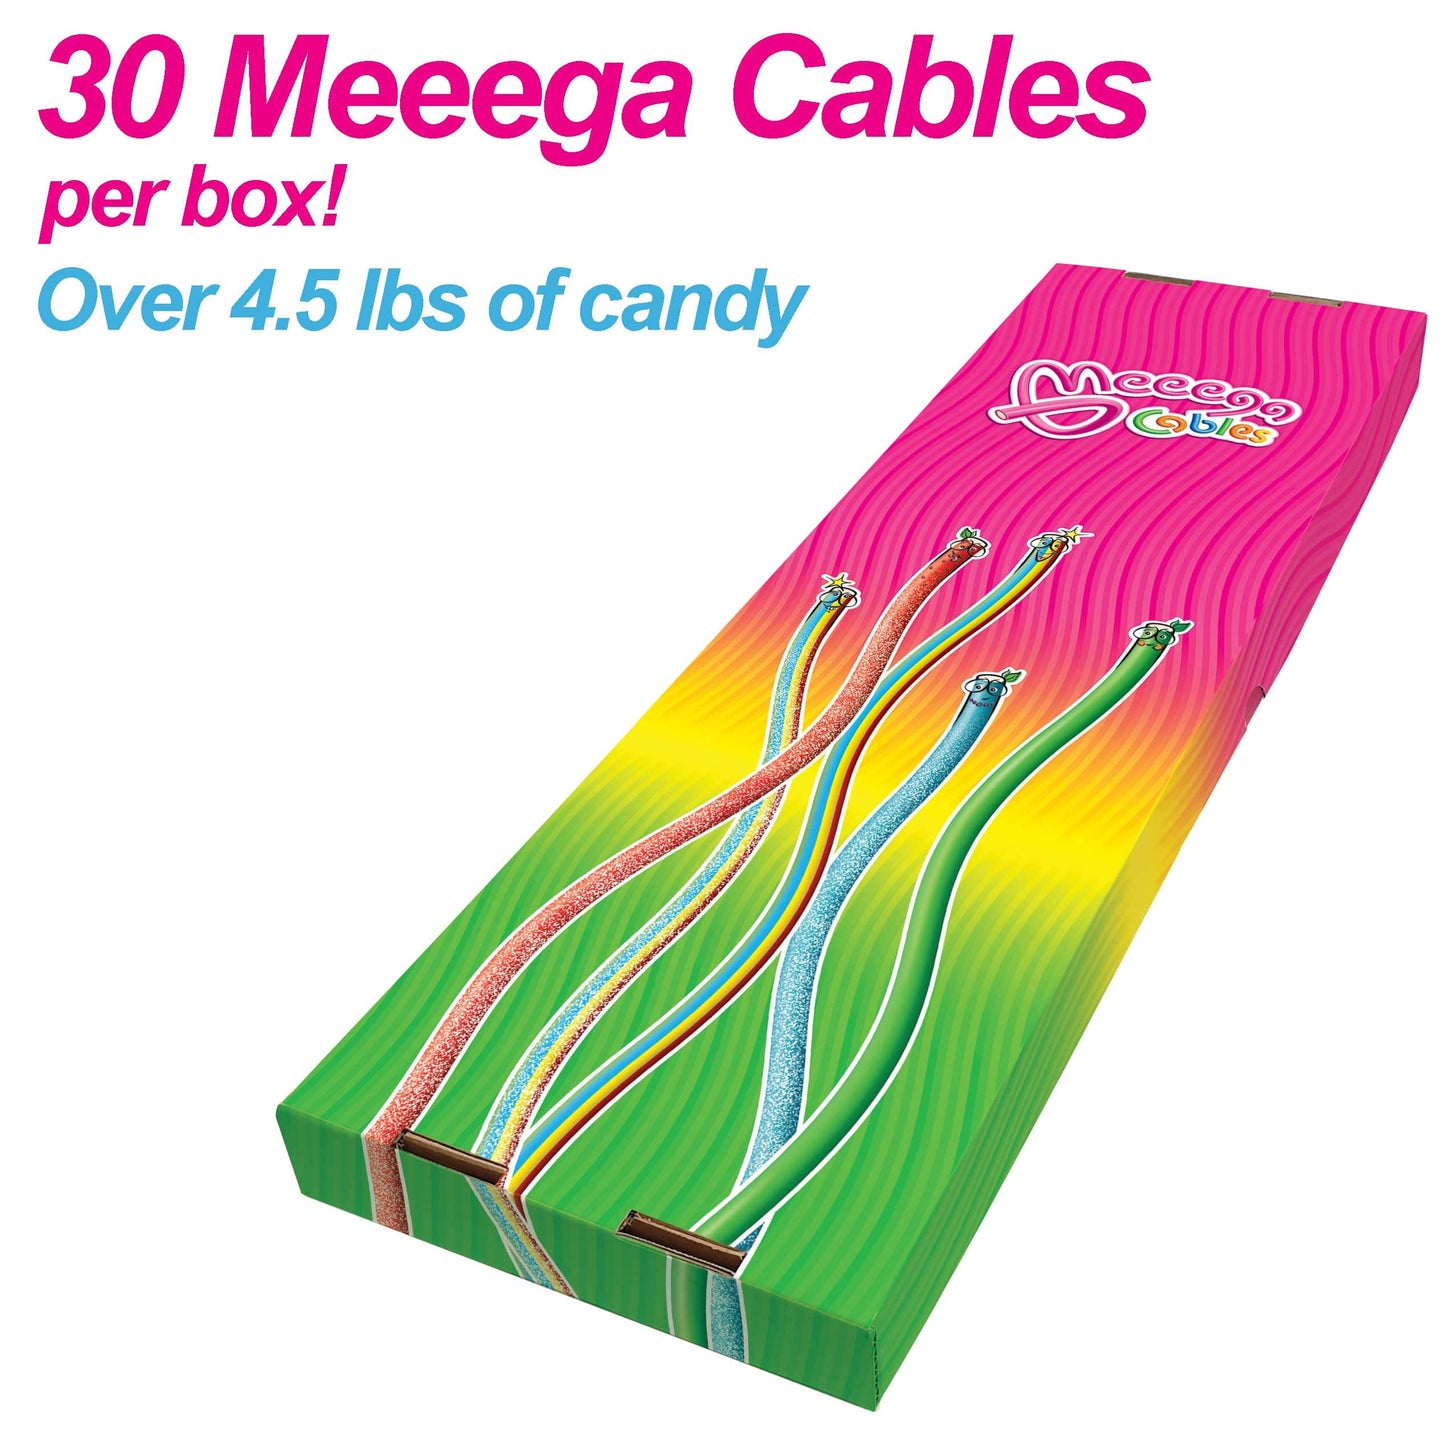 Novelty Concessions Meeega Cables European chewy rope candy - Box of 30 individually wrapped Meeega Cables, each over 2-feet long cups with lids and straws